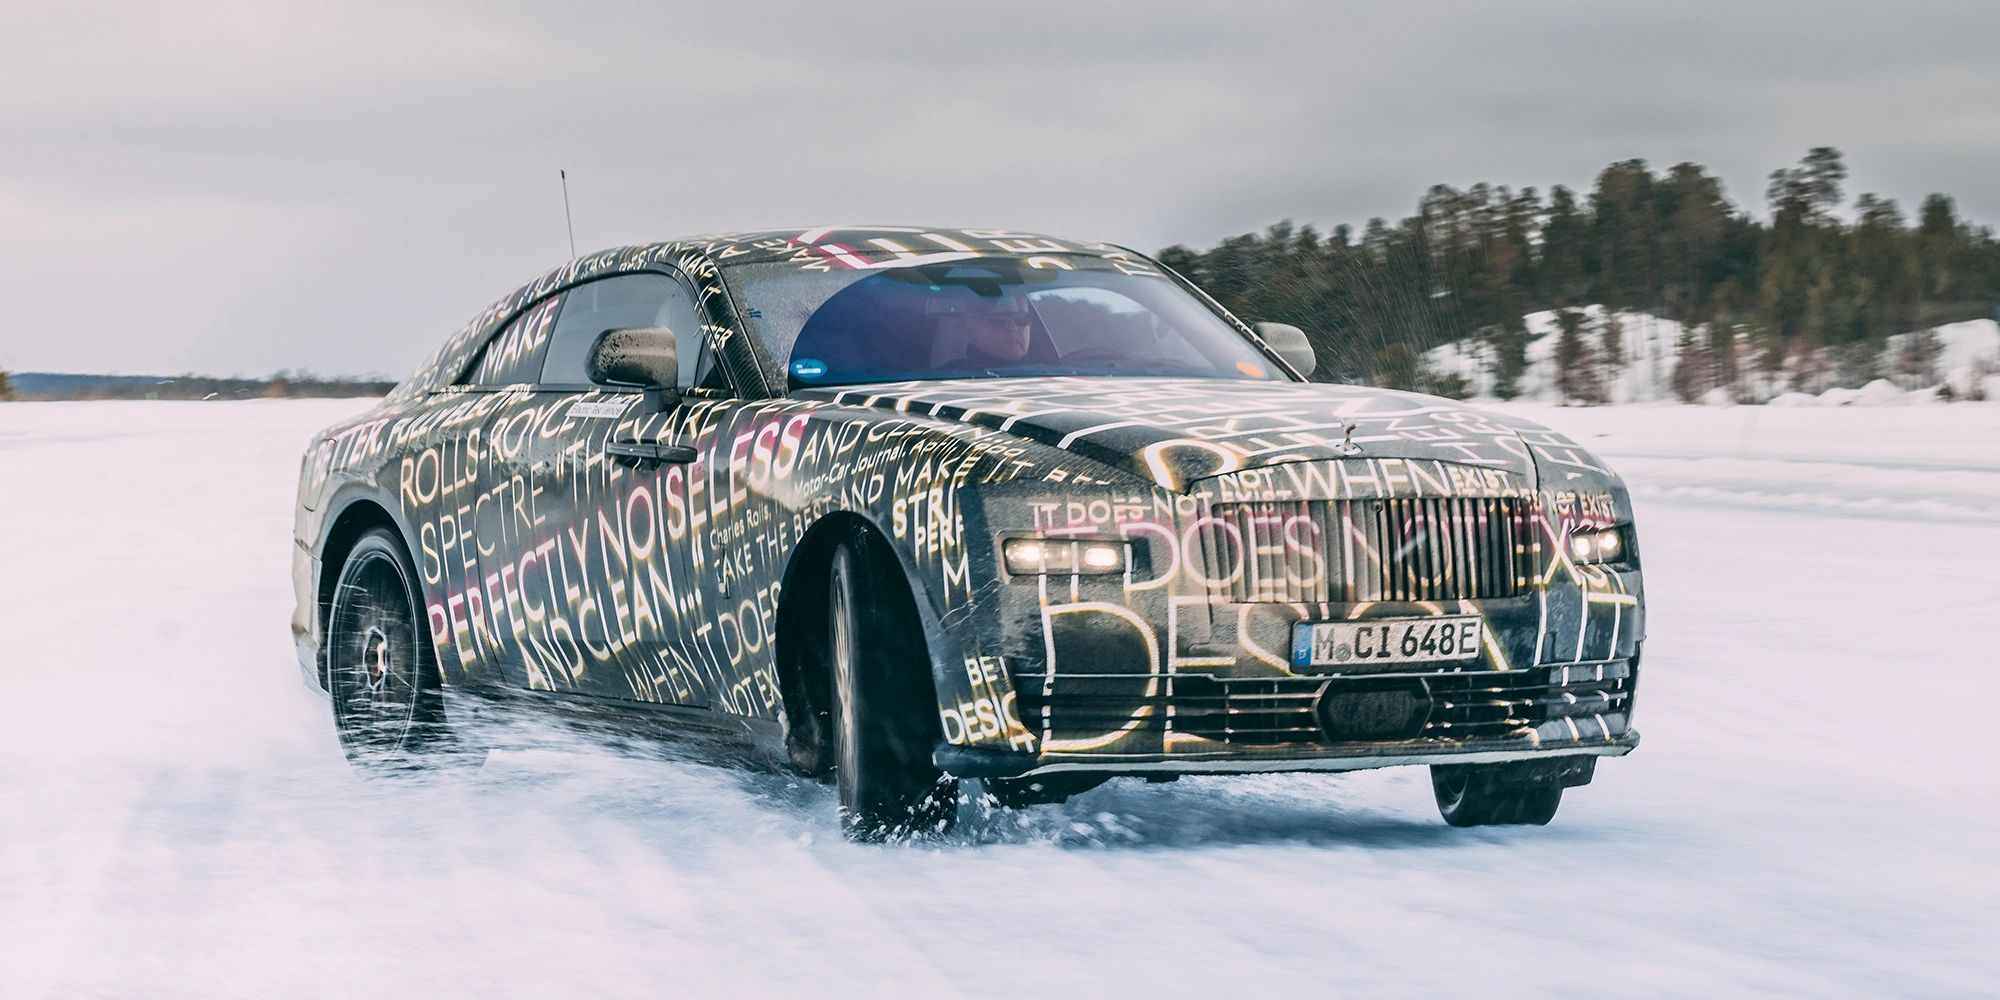 The upcoming Spectre during winter testing in Sweden / Source: Rolls-Royce